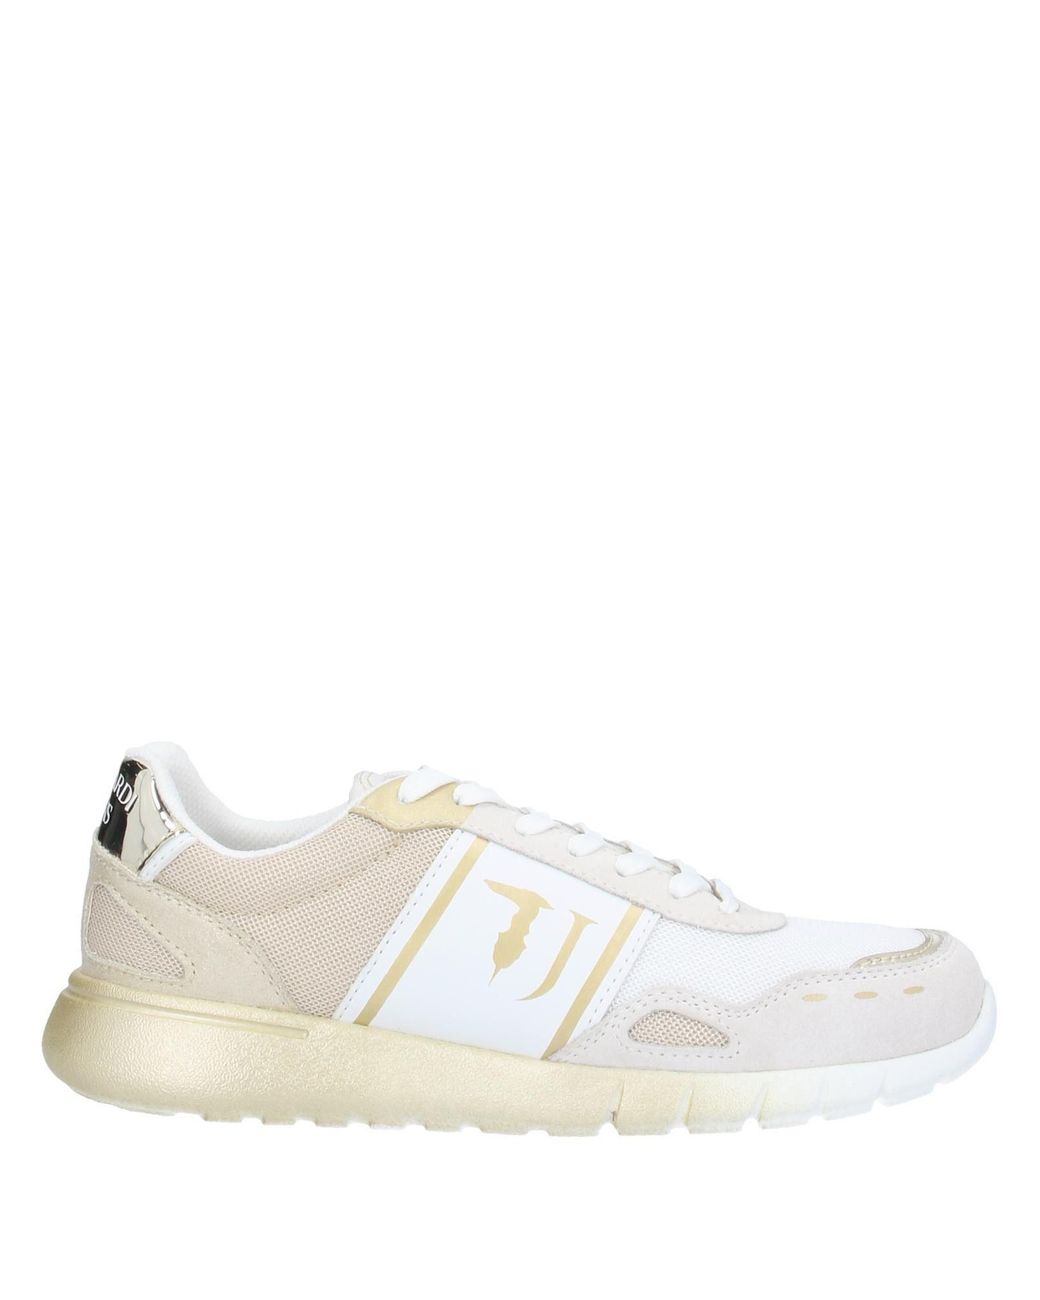 Trussardi Leather Low-tops & Sneakers in White - Lyst